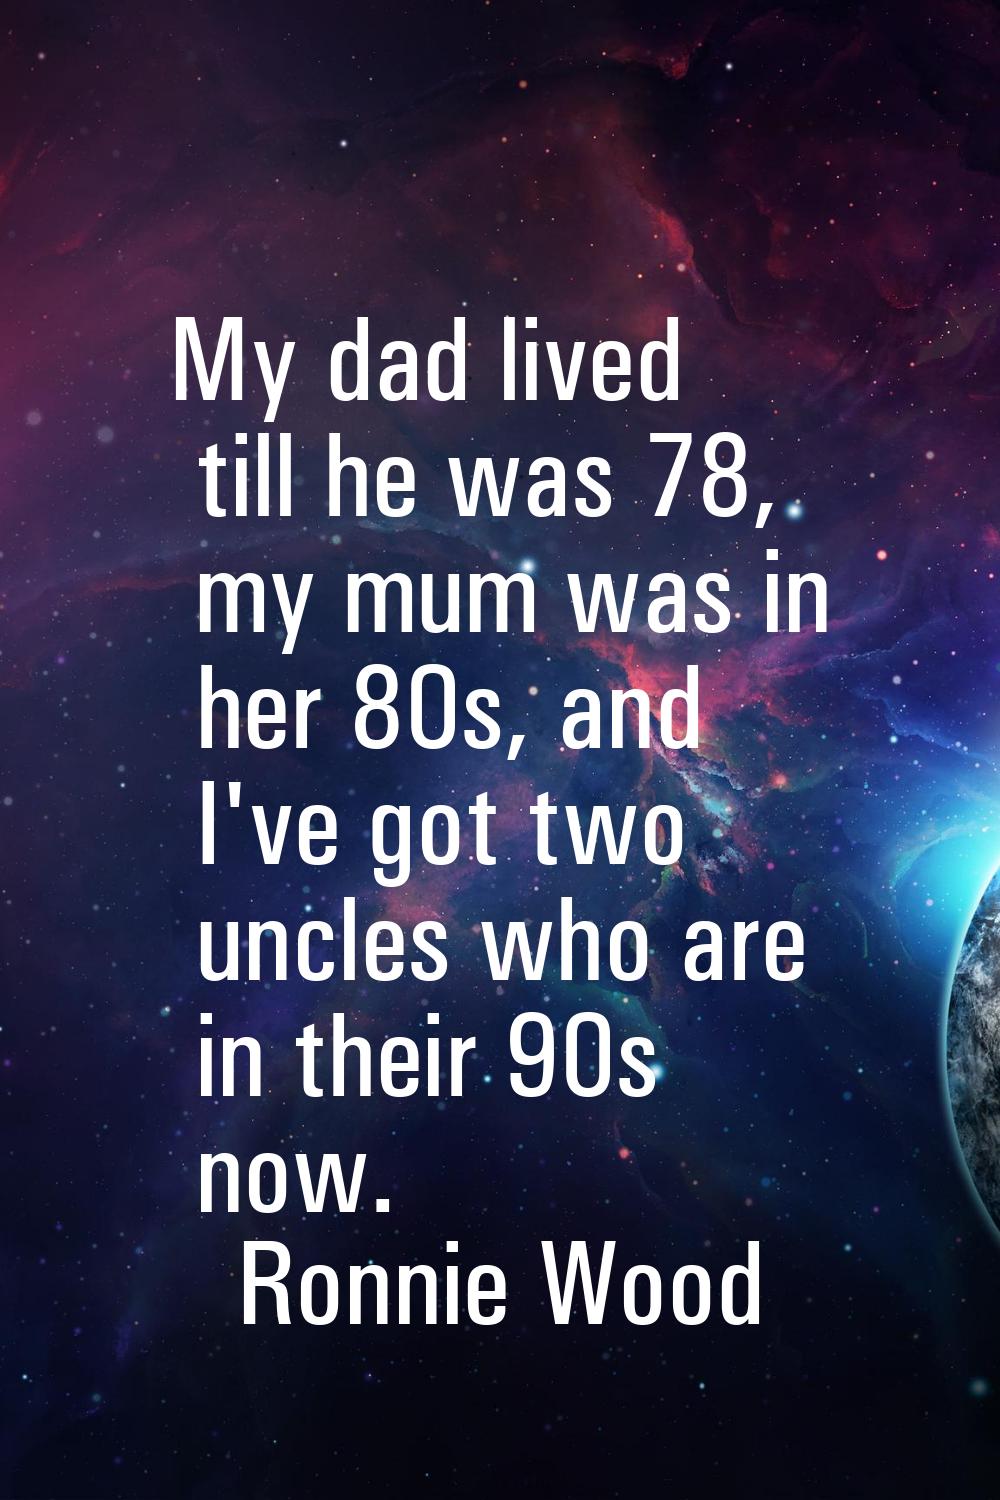 My dad lived till he was 78, my mum was in her 80s, and I've got two uncles who are in their 90s no